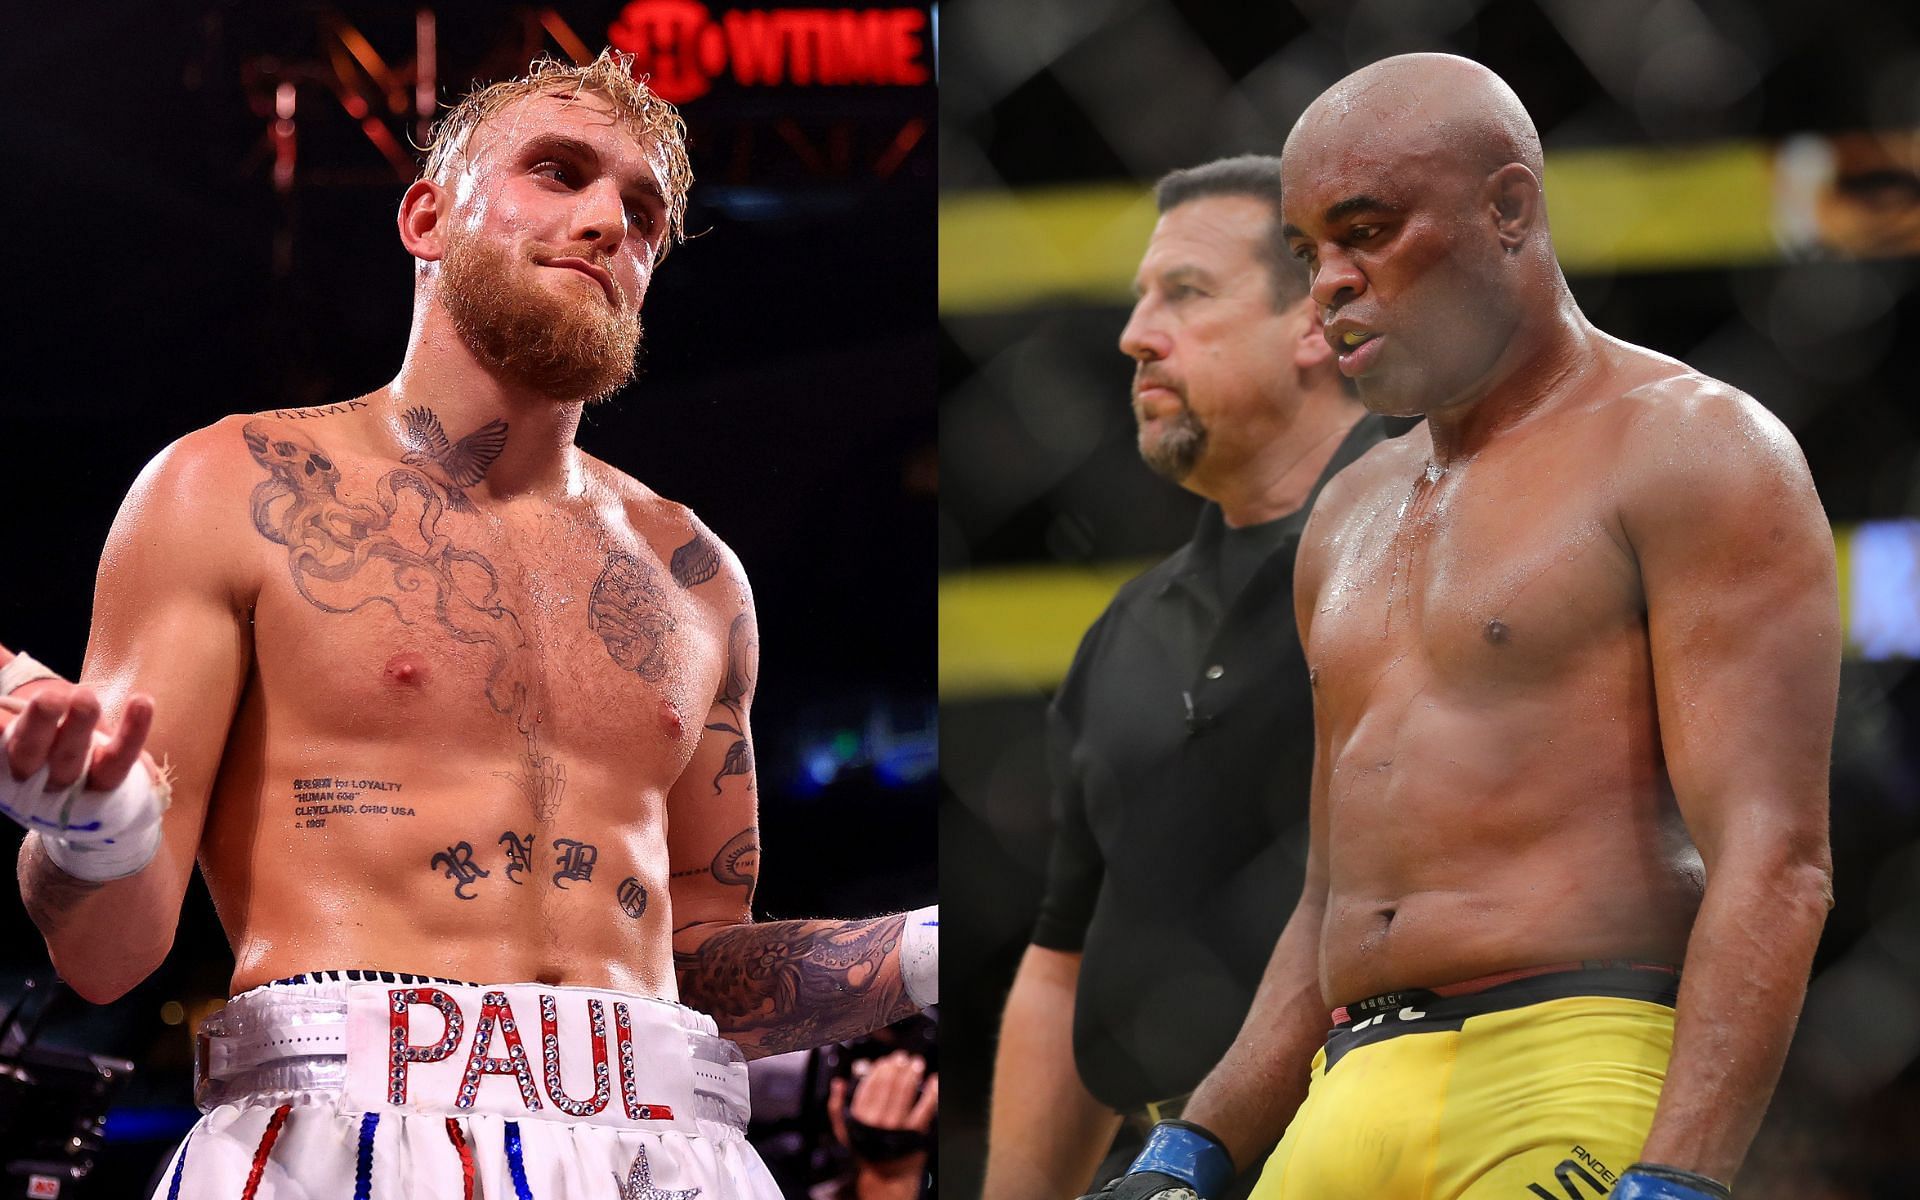 Jake Paul (left) and Anderson Silva (right) (Image credits Getty Images)